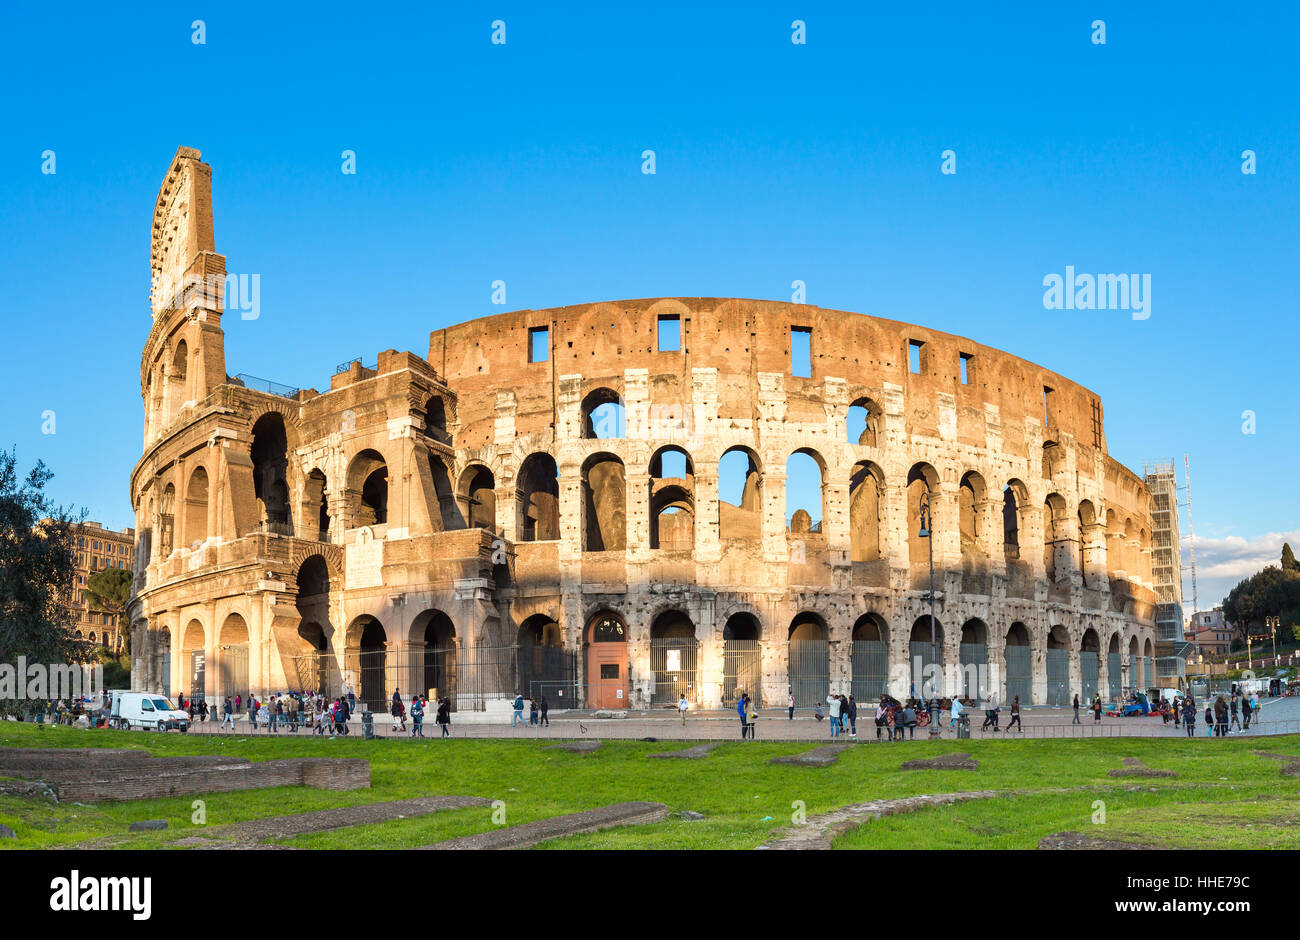 Sunset view of Colosseum in Rome in Italy. Stock Photo